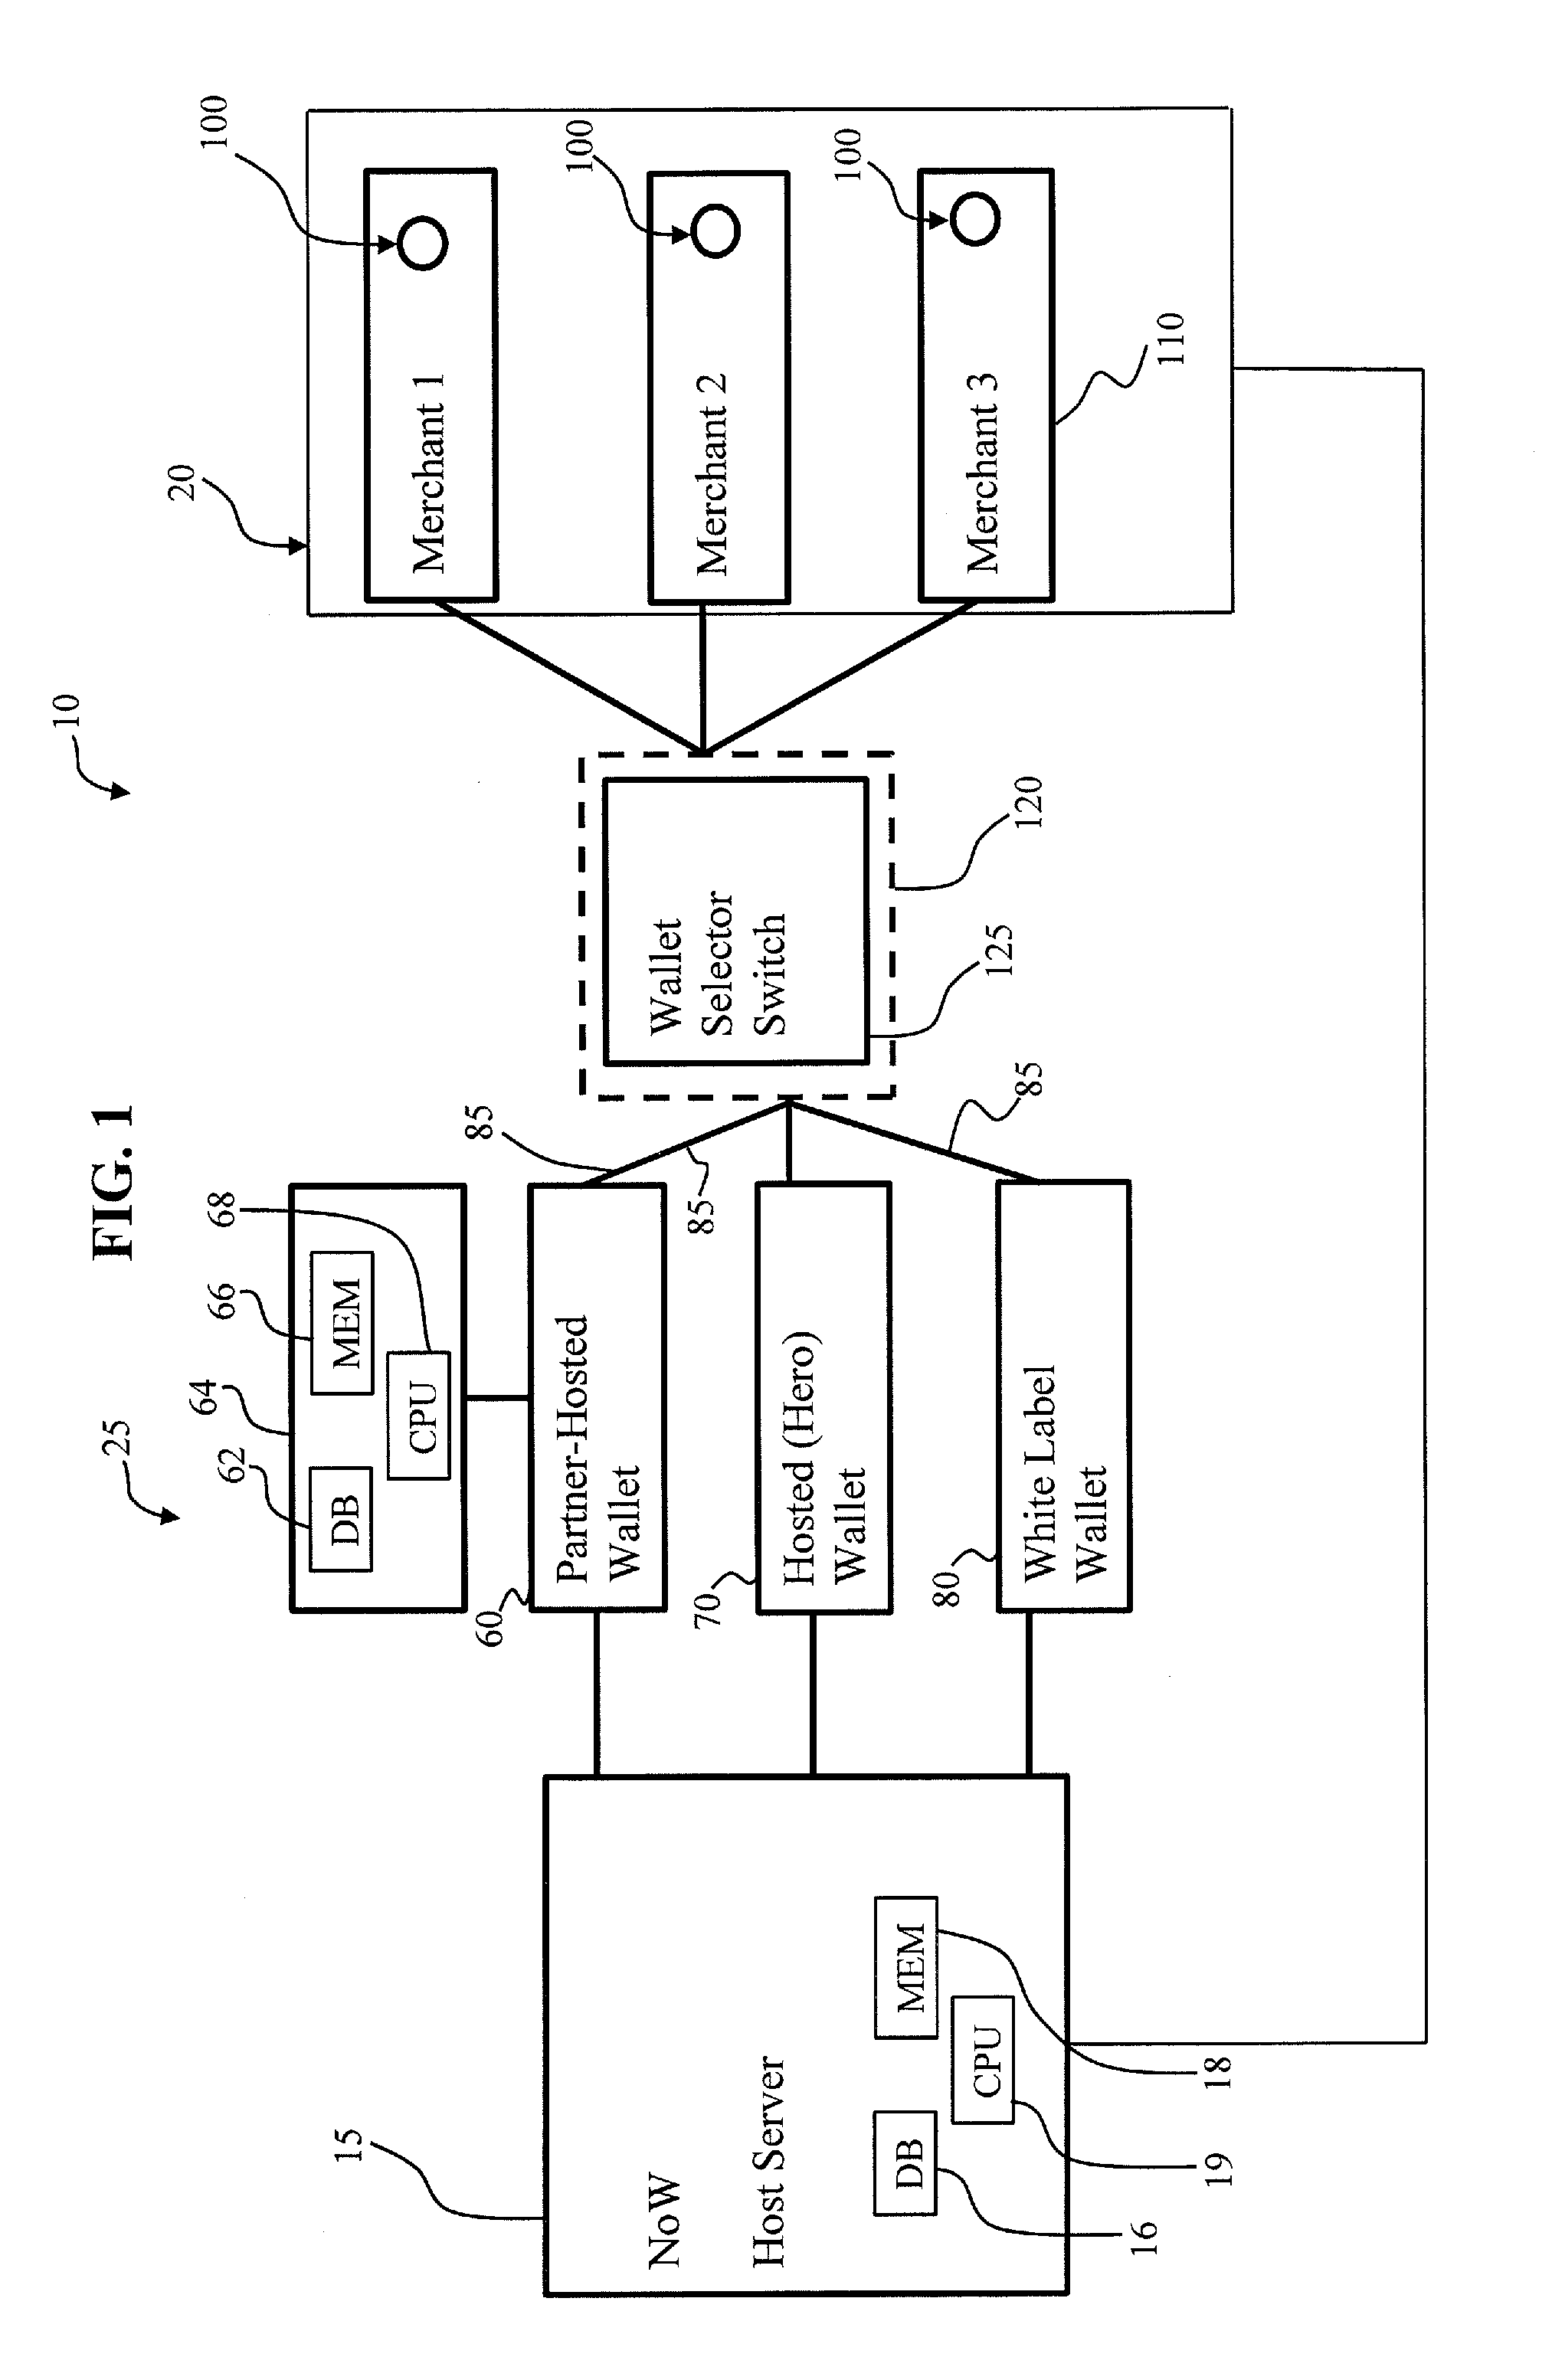 System and method to enable a network of digital wallets